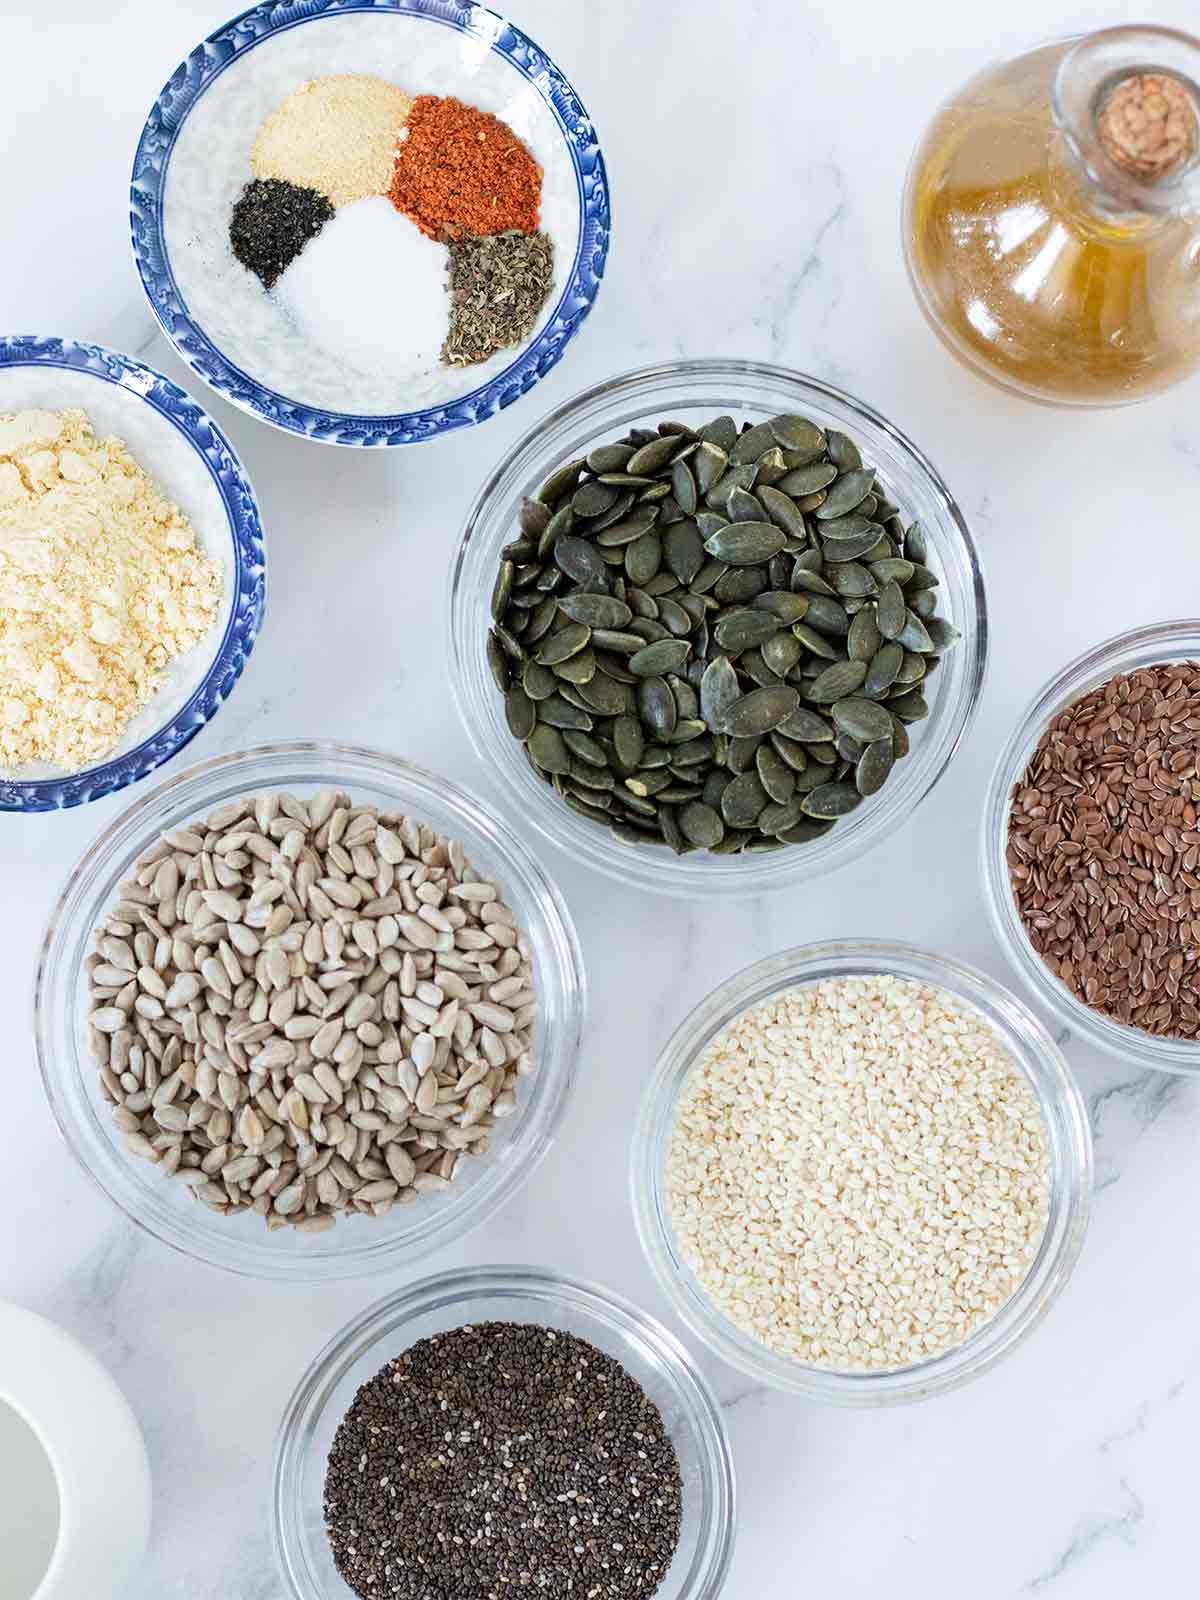 Plant-based ingredients for making homemade vegan gluten-free seed crackers: sunflower seeds, pumpkin seeds, sesame seeds, flax seeds, chia seeds, chickpea flour, olive oil, salt, herbs and spices